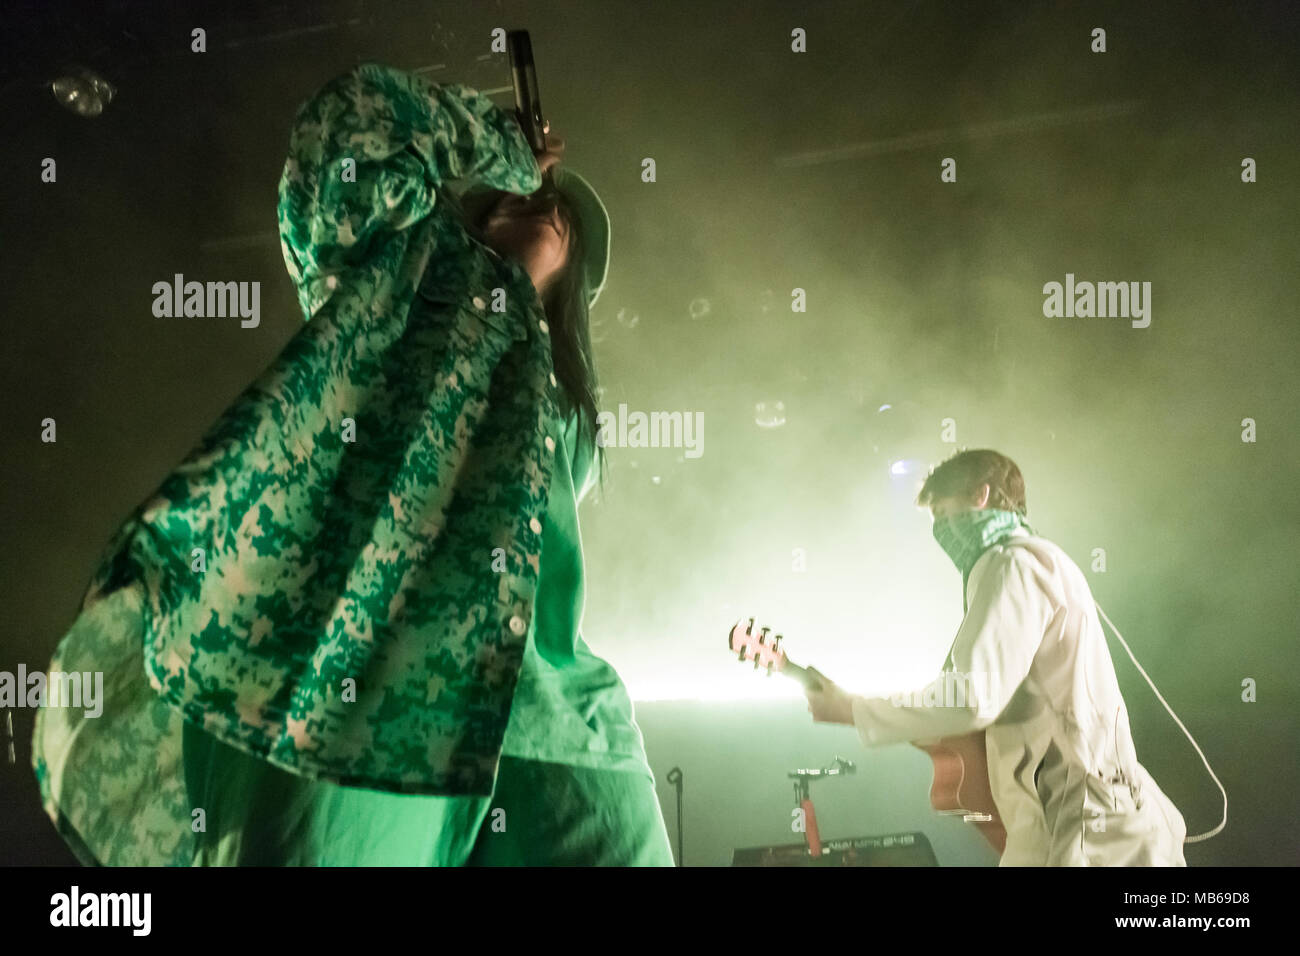 Billie Eilish performs in Los Angeles Stock Photo